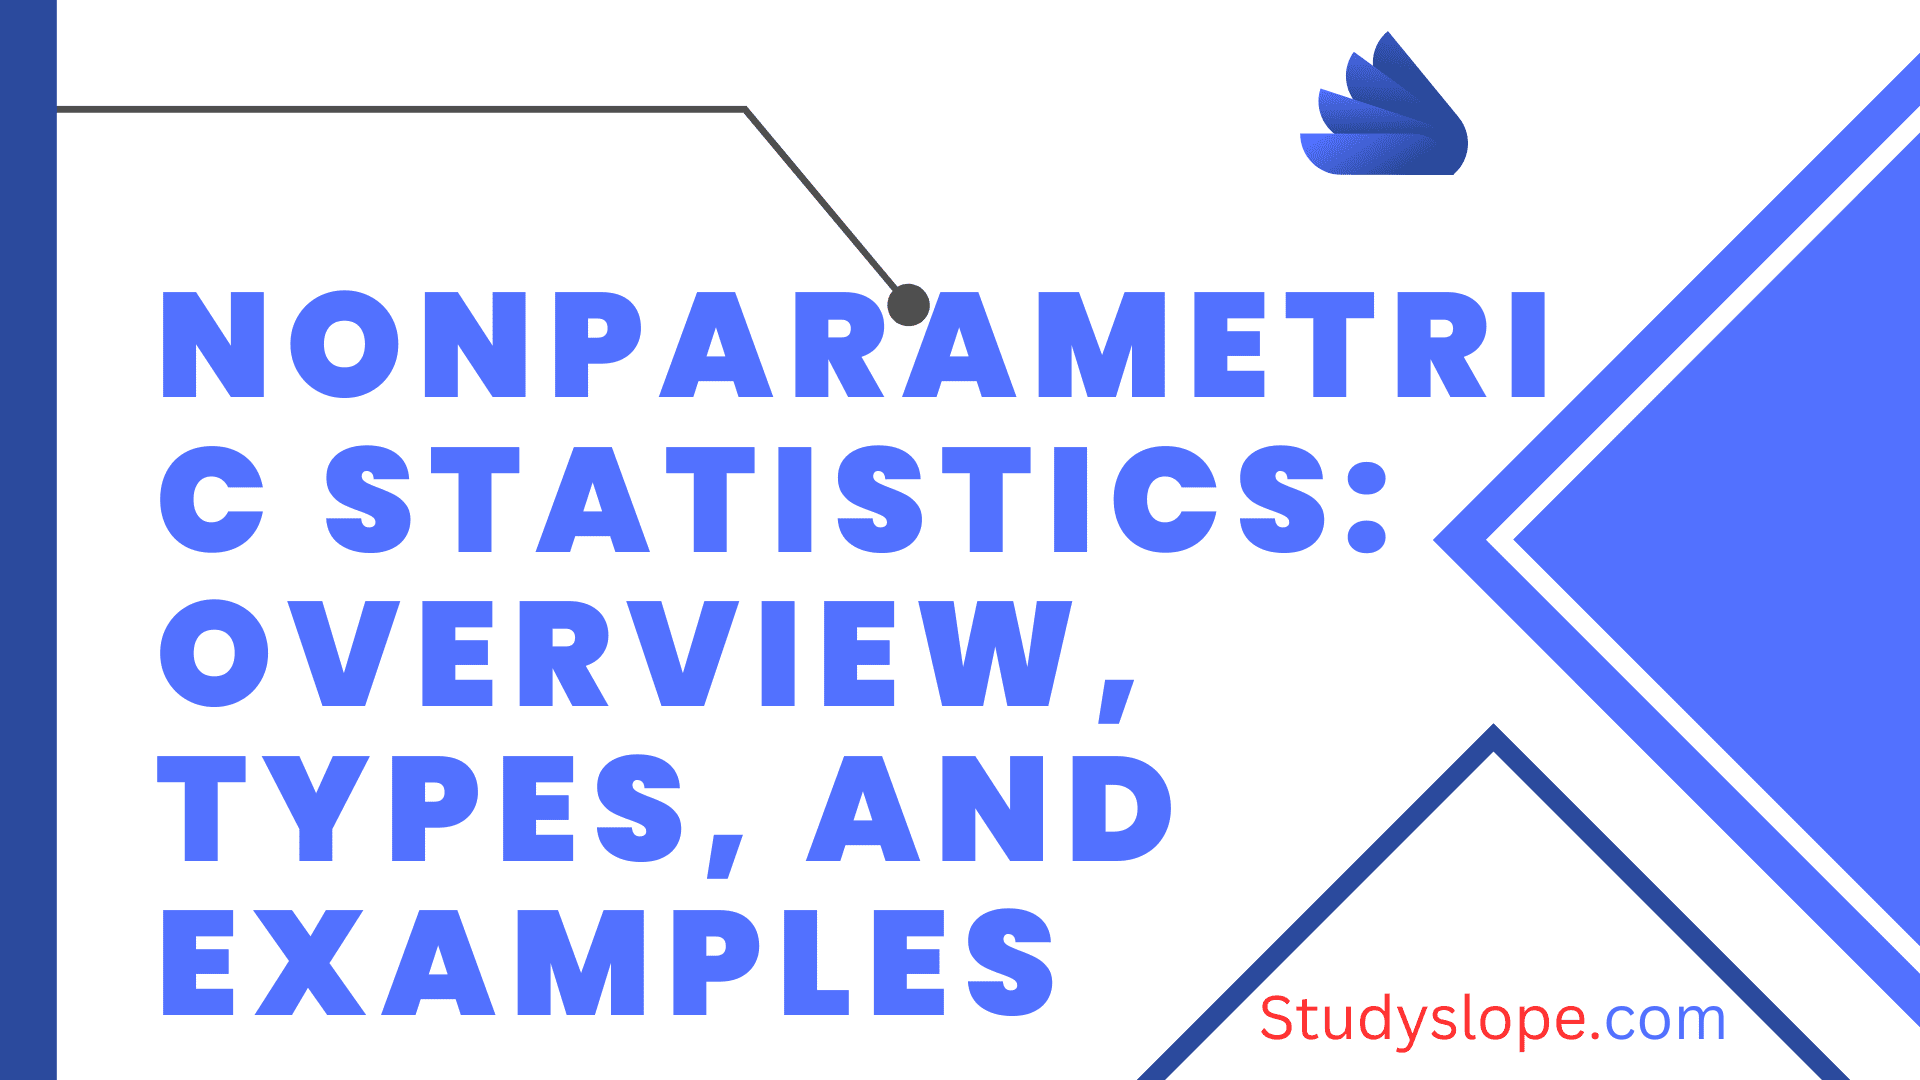 Nonparametric Statistics: Overview, Types, and Examples